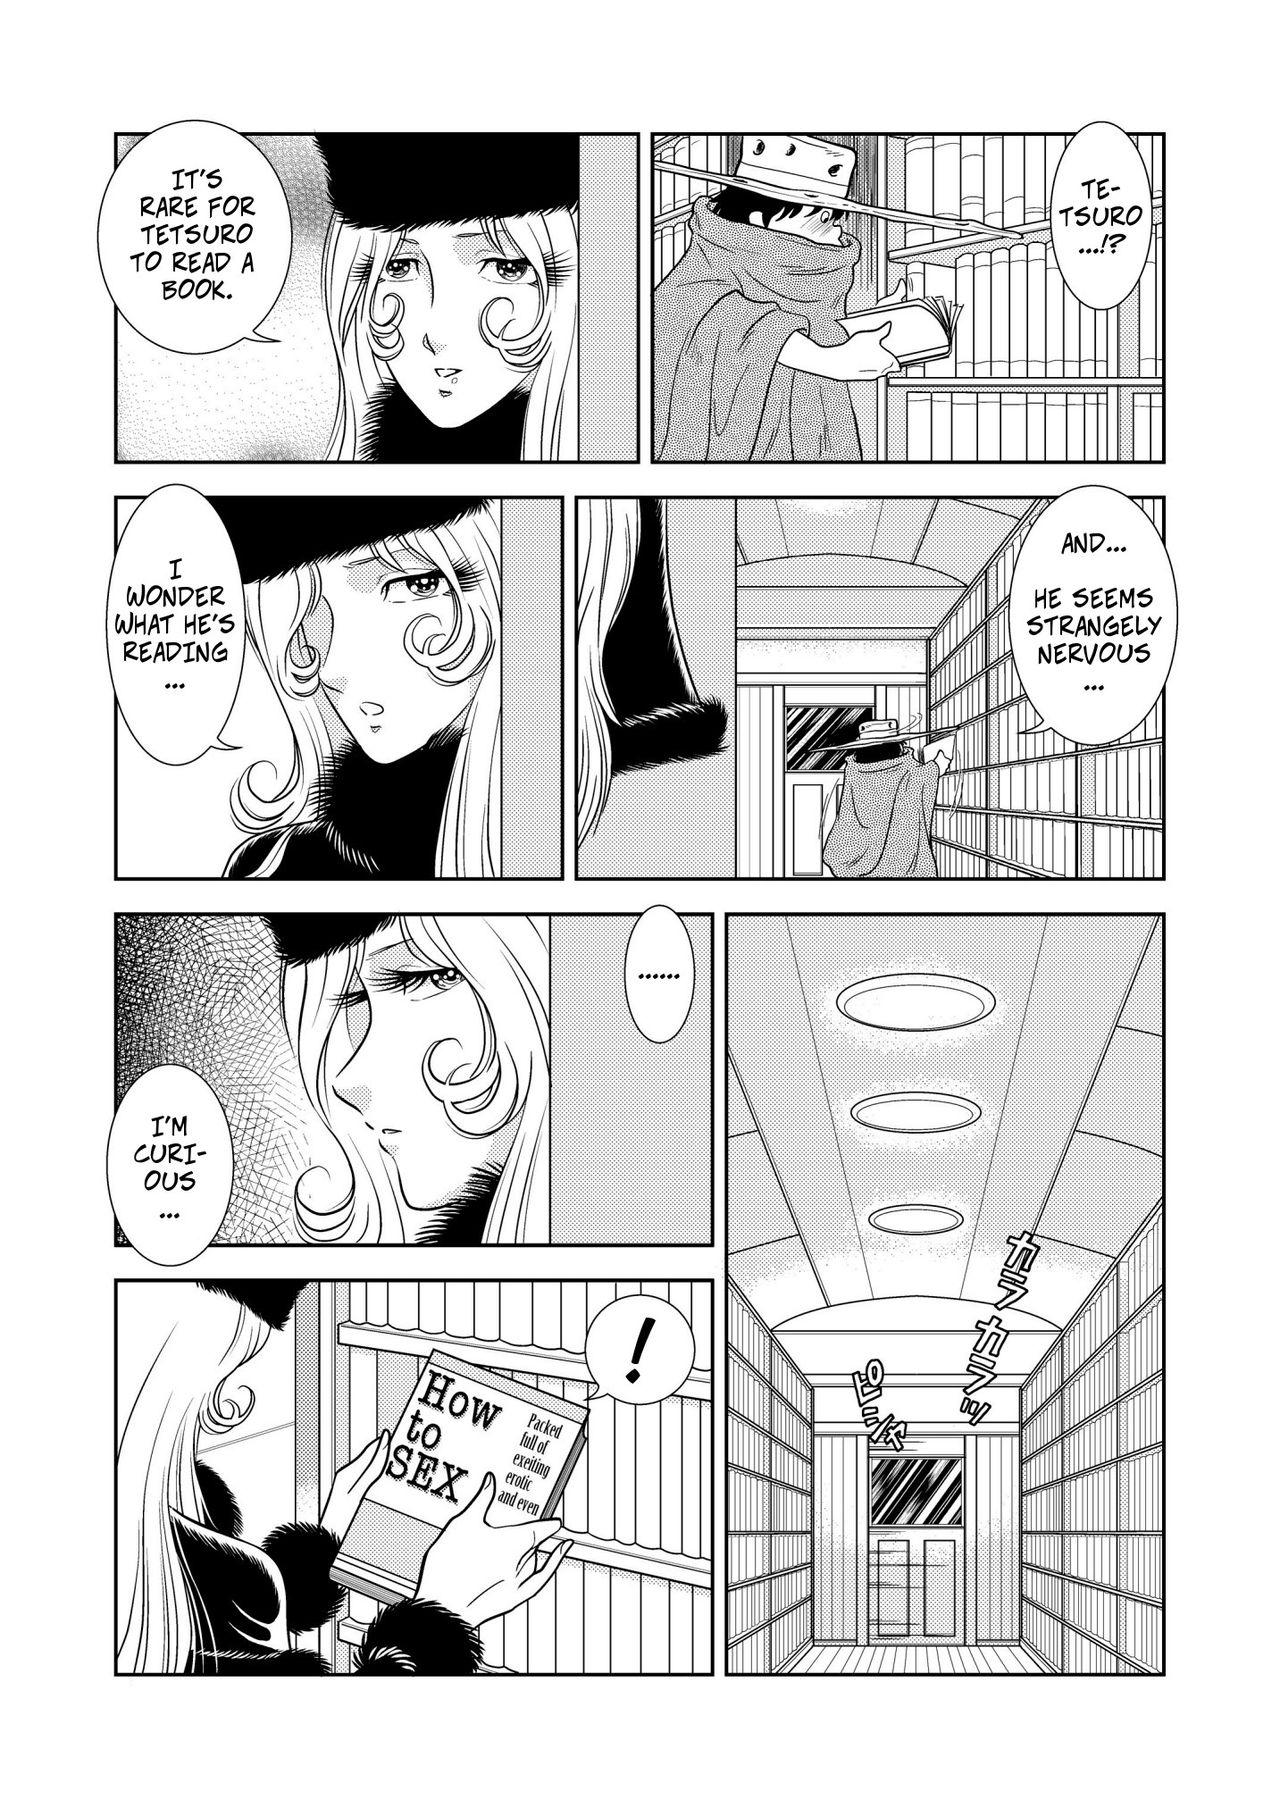 Moms Maetel Story 2 - Galaxy express 999 Camporn - Page 3